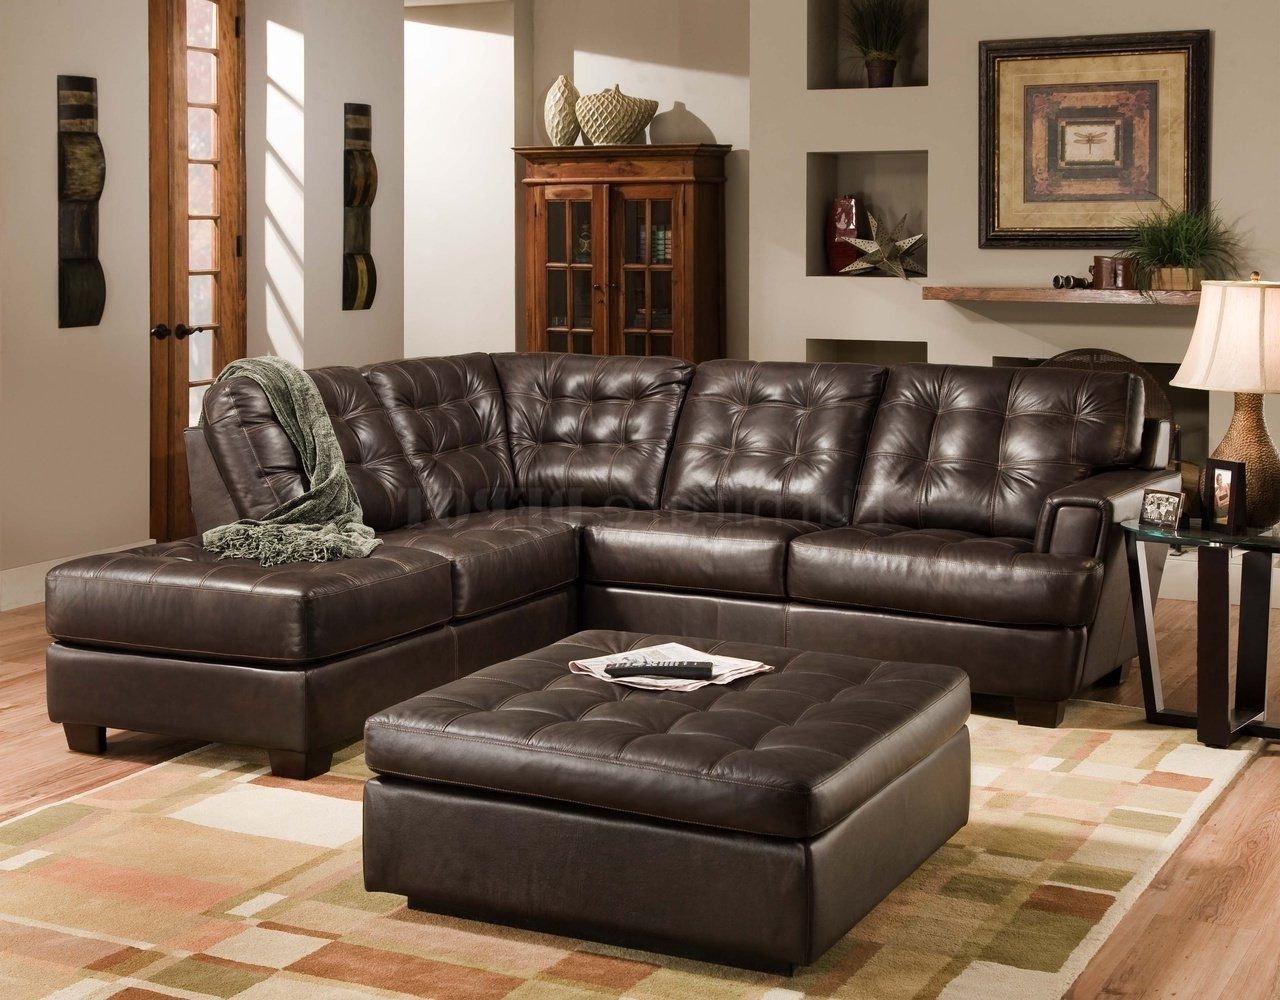 Leather Sectional Sofas With Chaise Throughout Most Current Double Chaise Loveseat Leather Loveseat With Chaise Large (View 10 of 15)